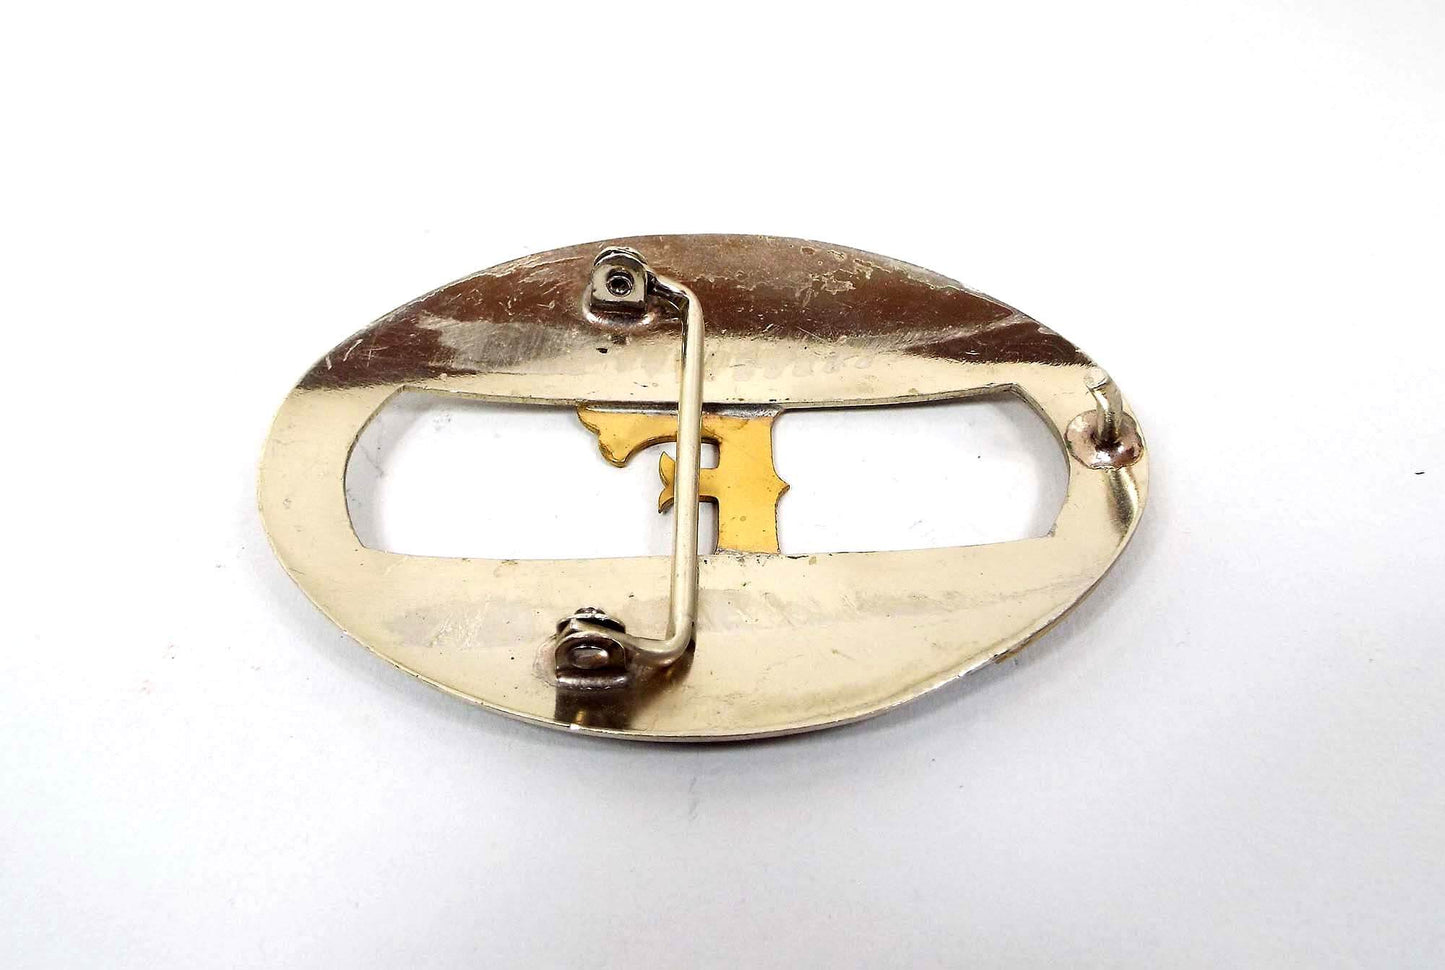 Two Tone Initial Letter F Vintage Belt Buckle